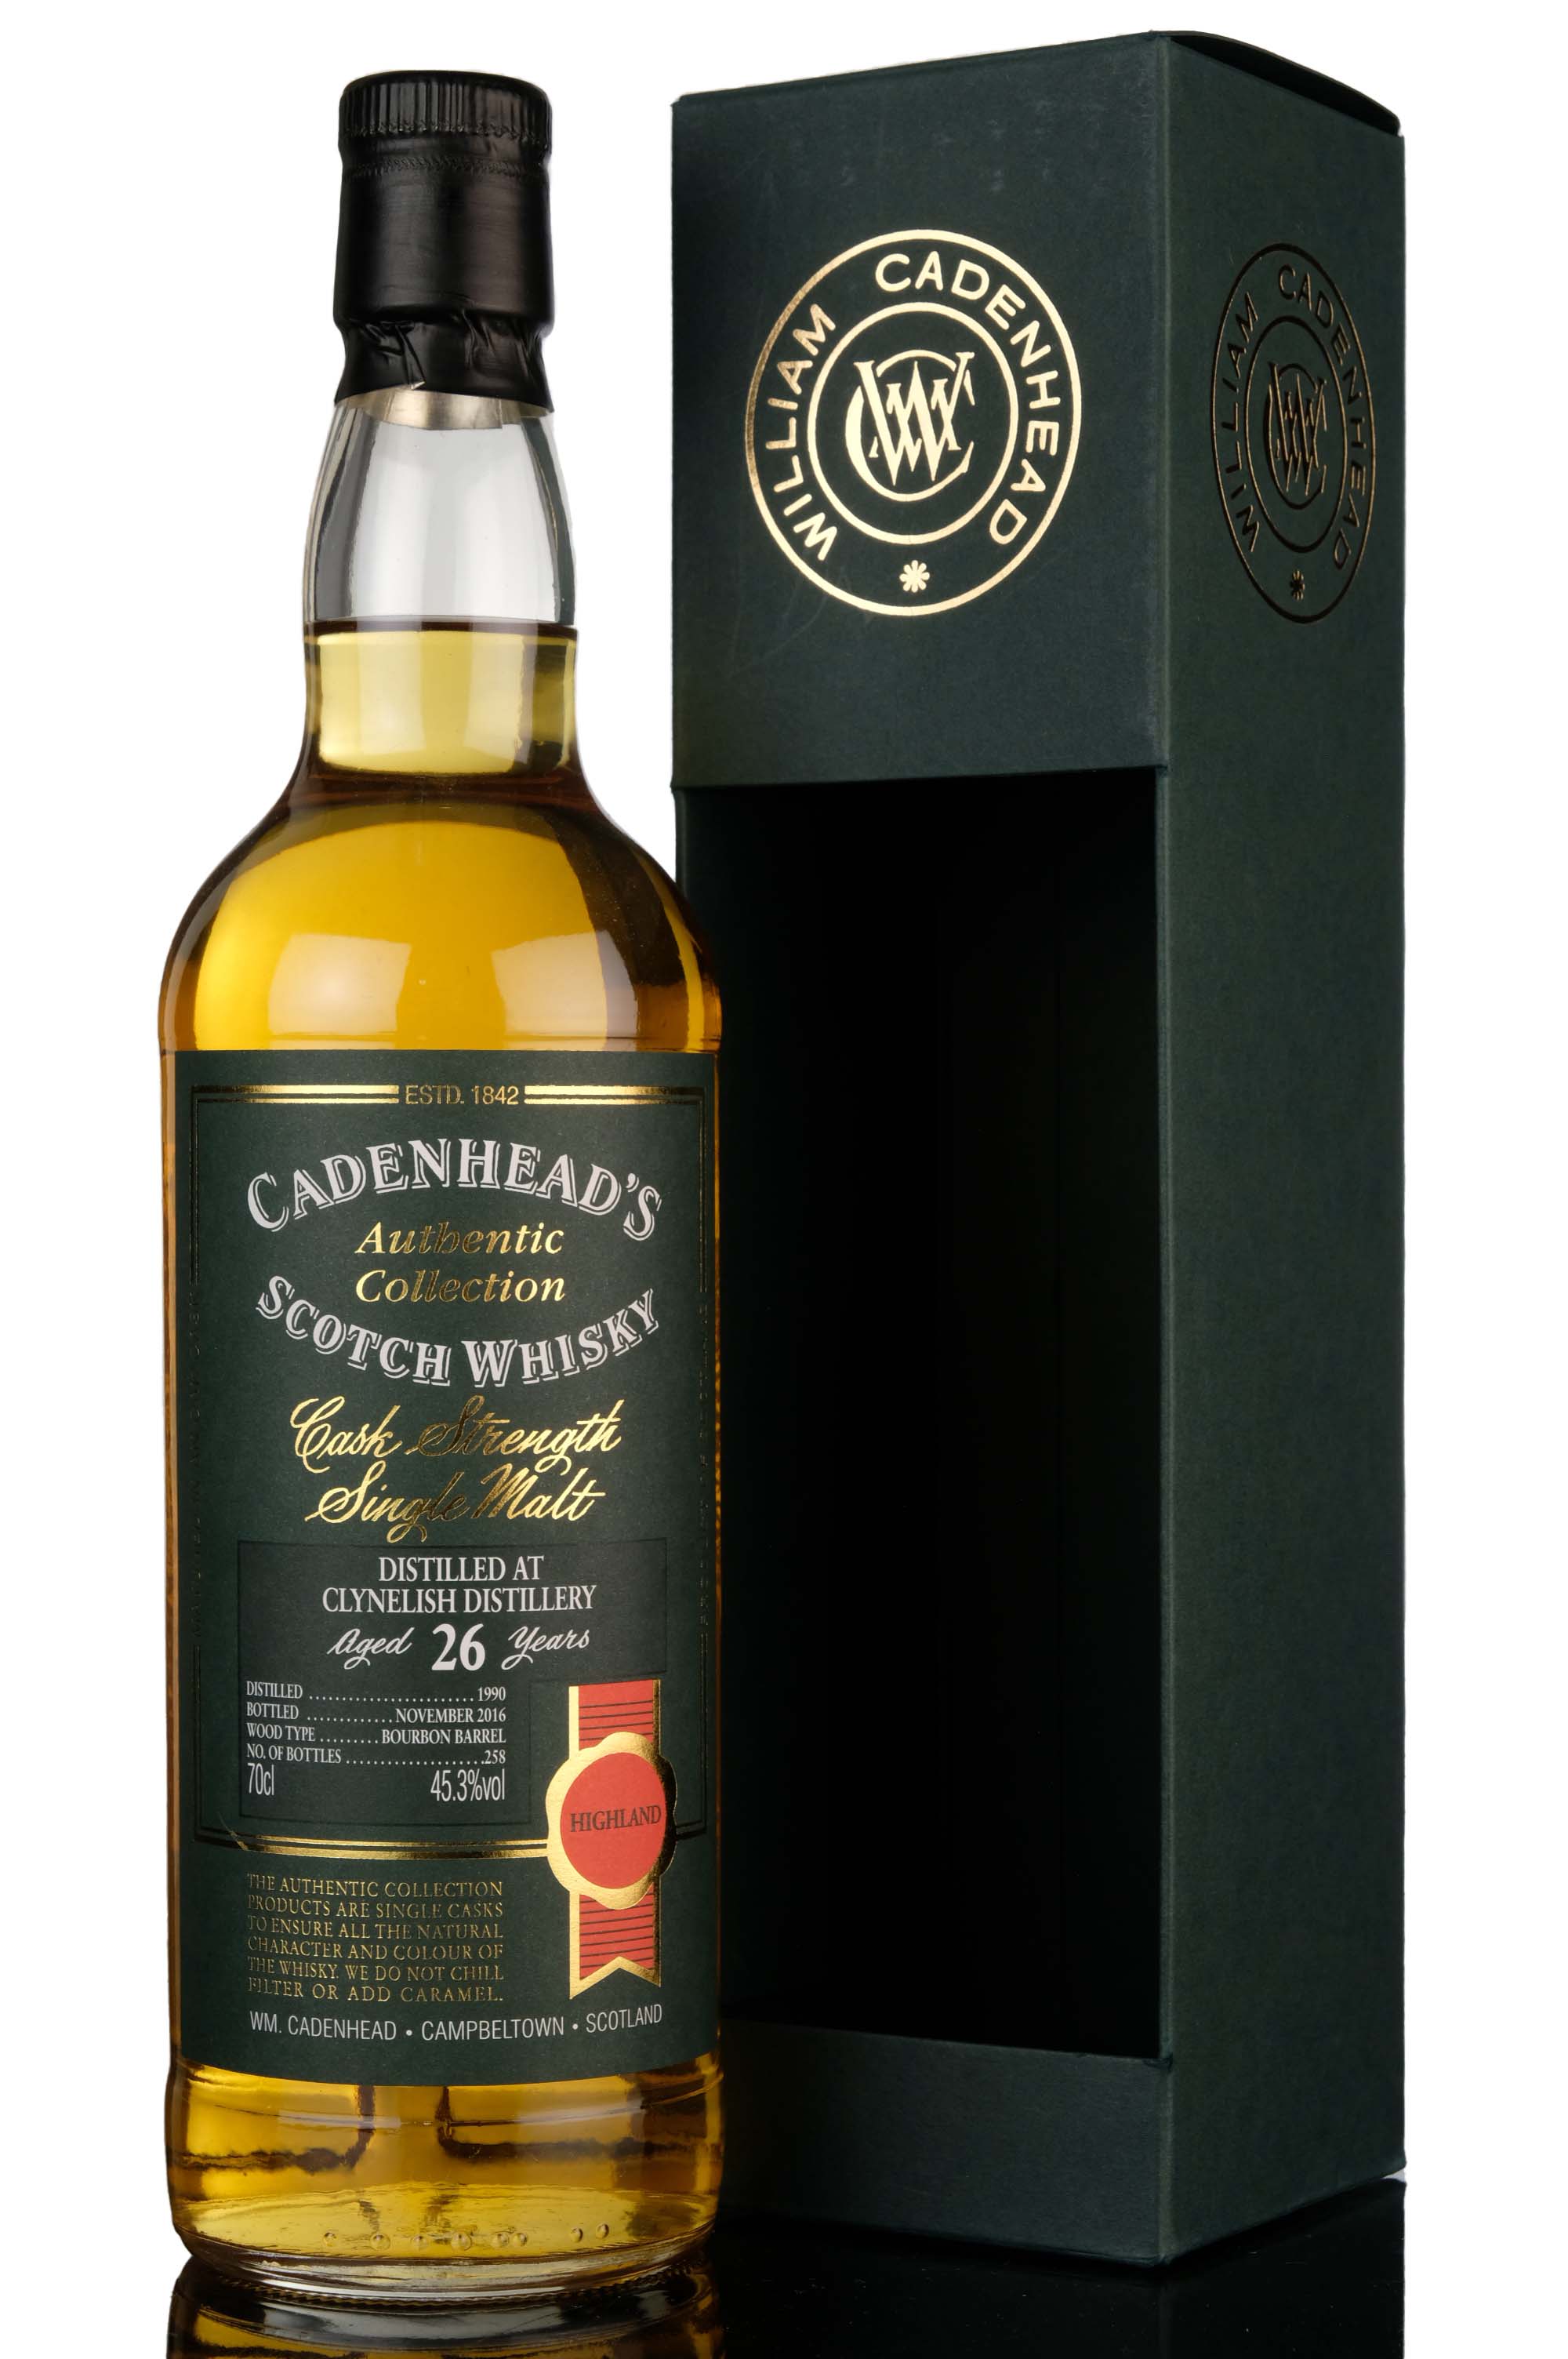 Clynelish 1990-2016 - 26 Year Old - Cadenheads Authentic Collection - Single Cask